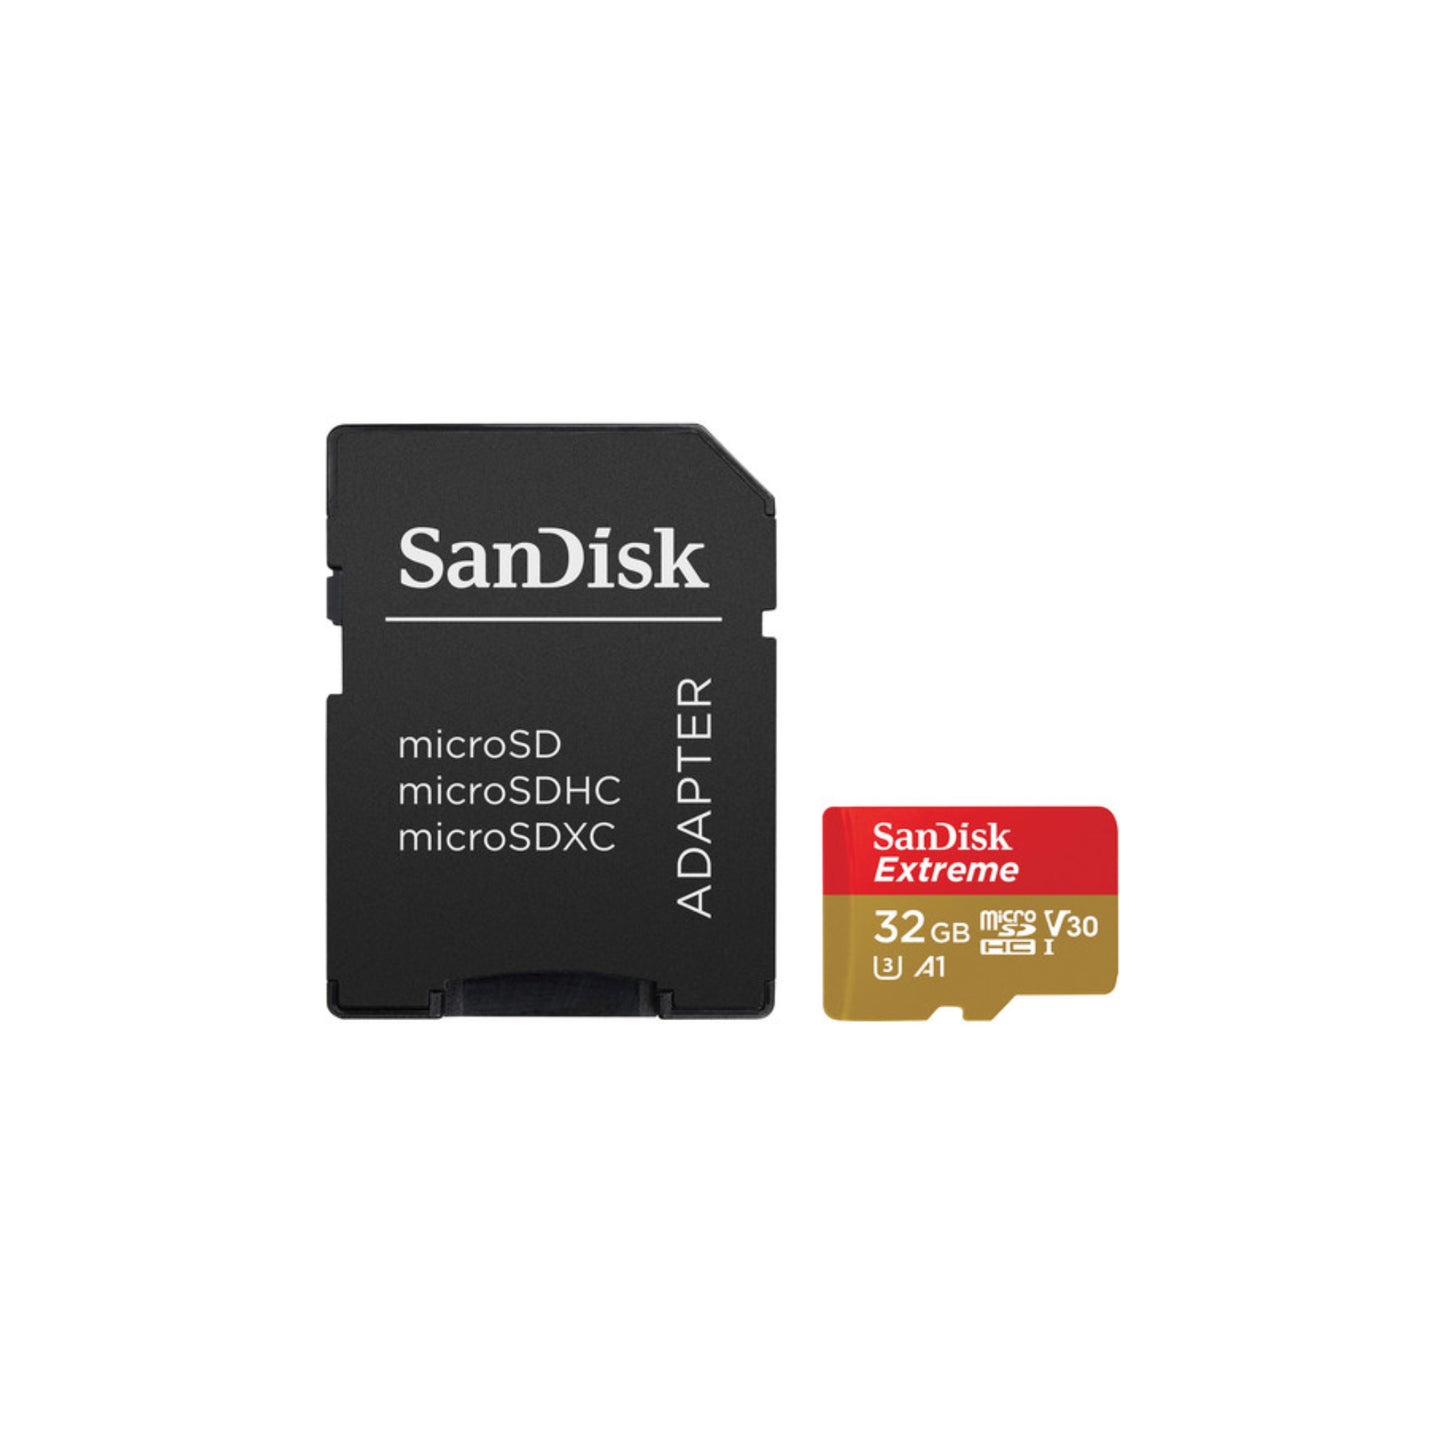 SANDISK Extreme Micro SD Card 32GB - Gold